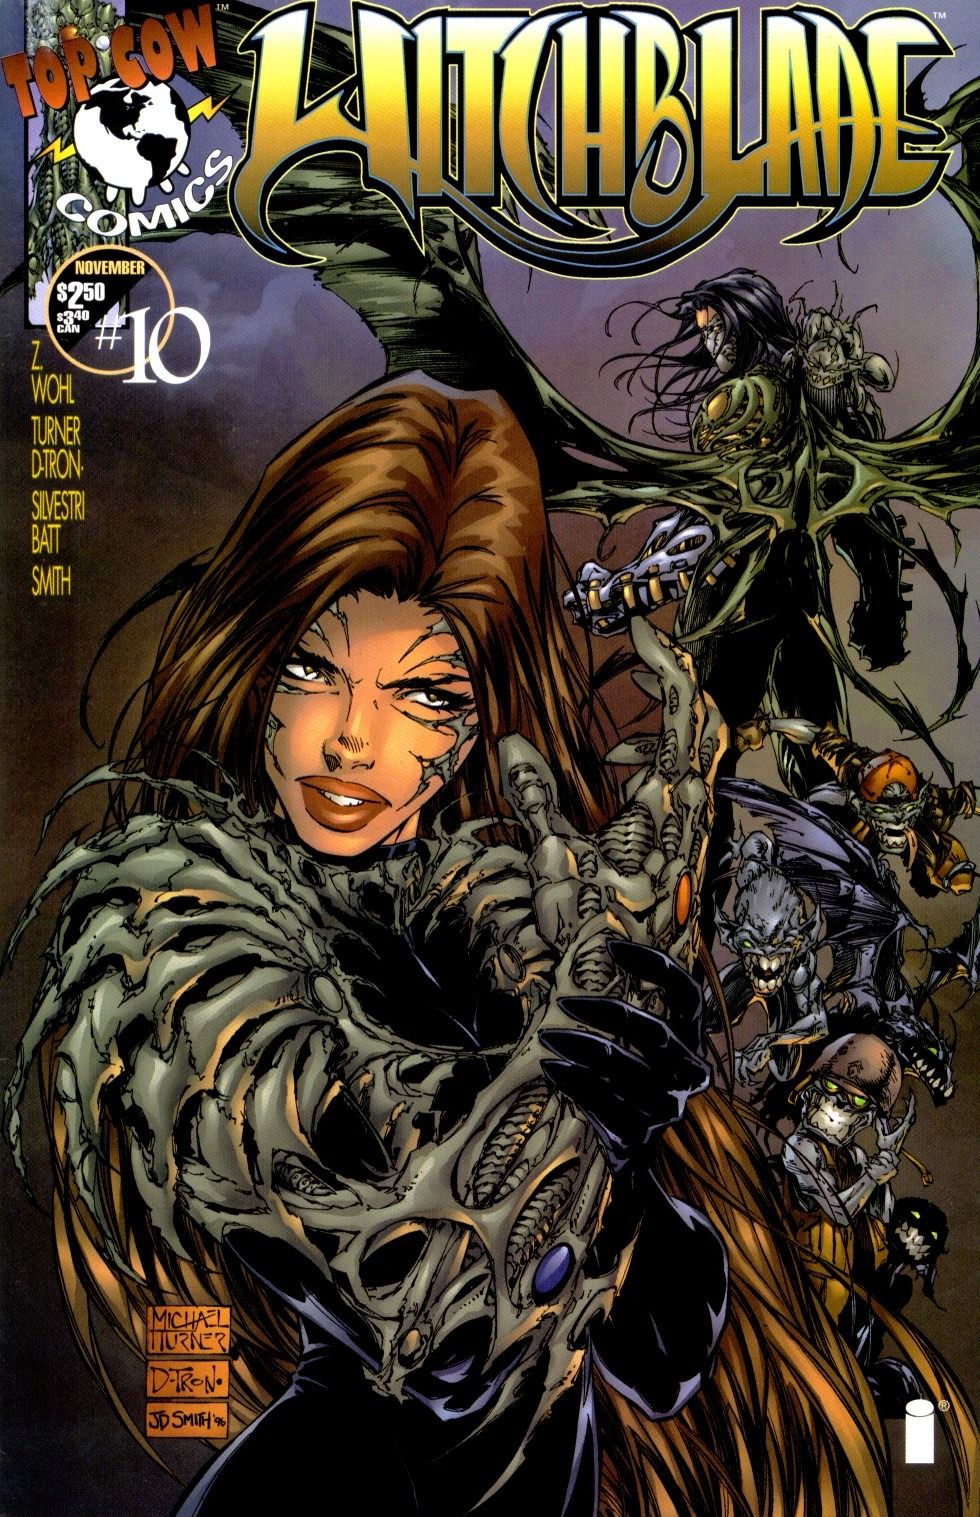 The cover of Witchblade #10